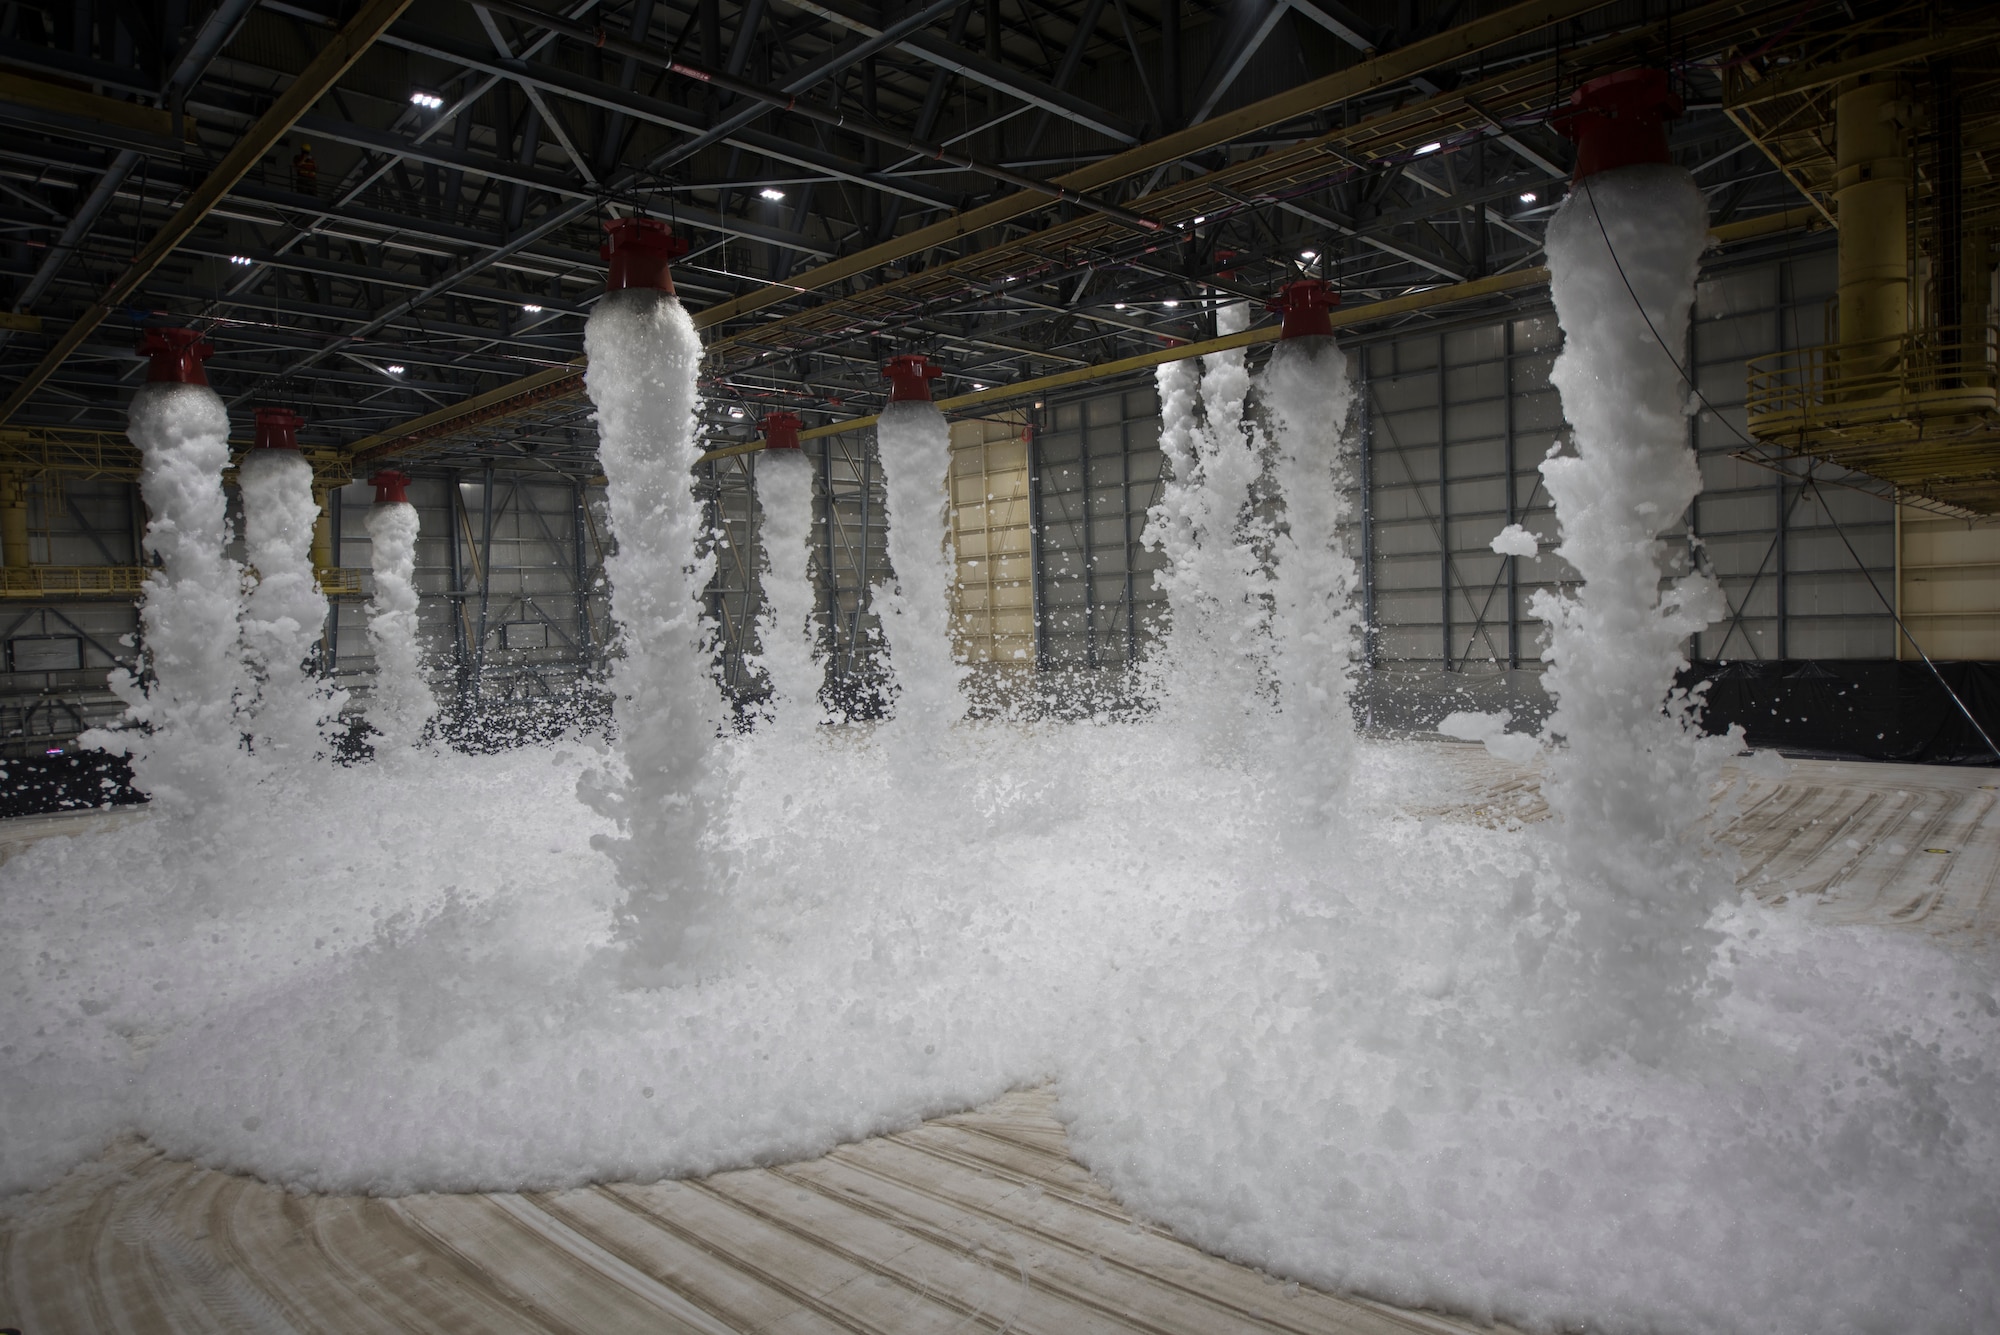 Hangar 811 fills with foam during a test of its high expansion foam fire suppression system Sept. 11, 2020, at Travis Air Force Base, California. The system is used to extinguish fires inside aircraft hangars to protect Airmen and Air Force assets. (U.S. Air Force photo by Senior Airman Cameron Otte)